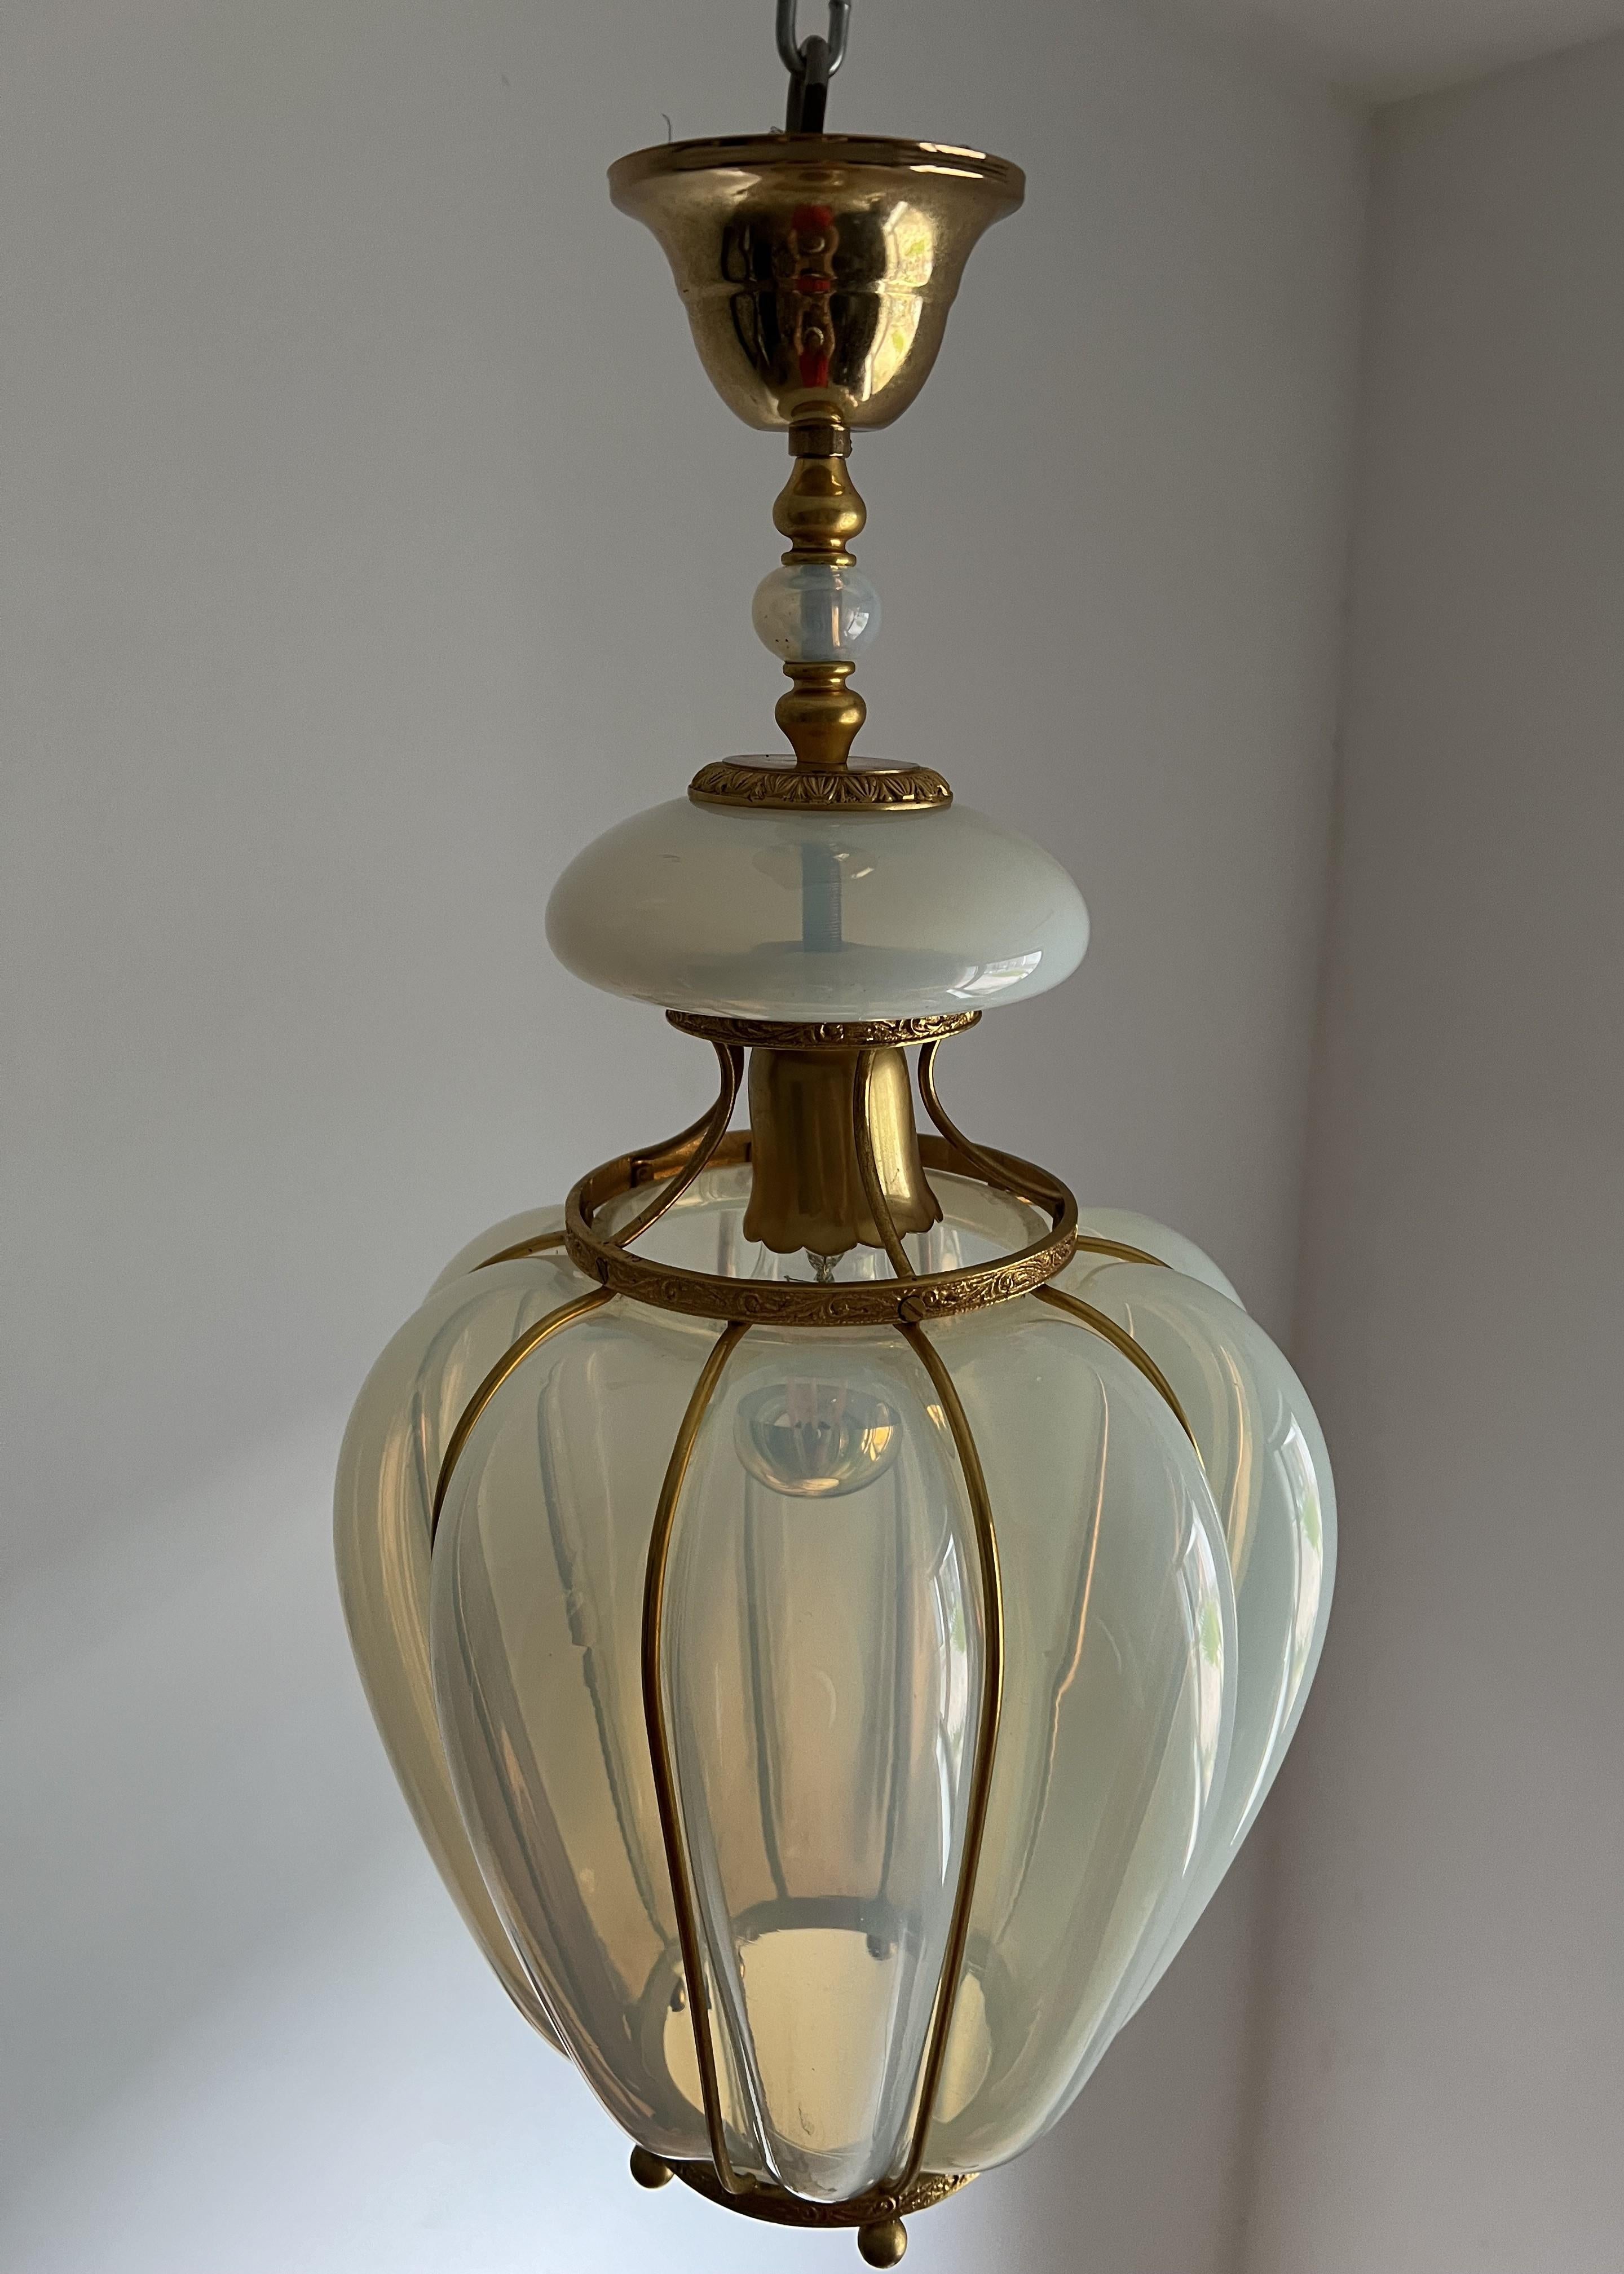 Opalescent Blue & Gold Murano Glass Lantern attr to Barovier Toso, Italy ca 1950 13